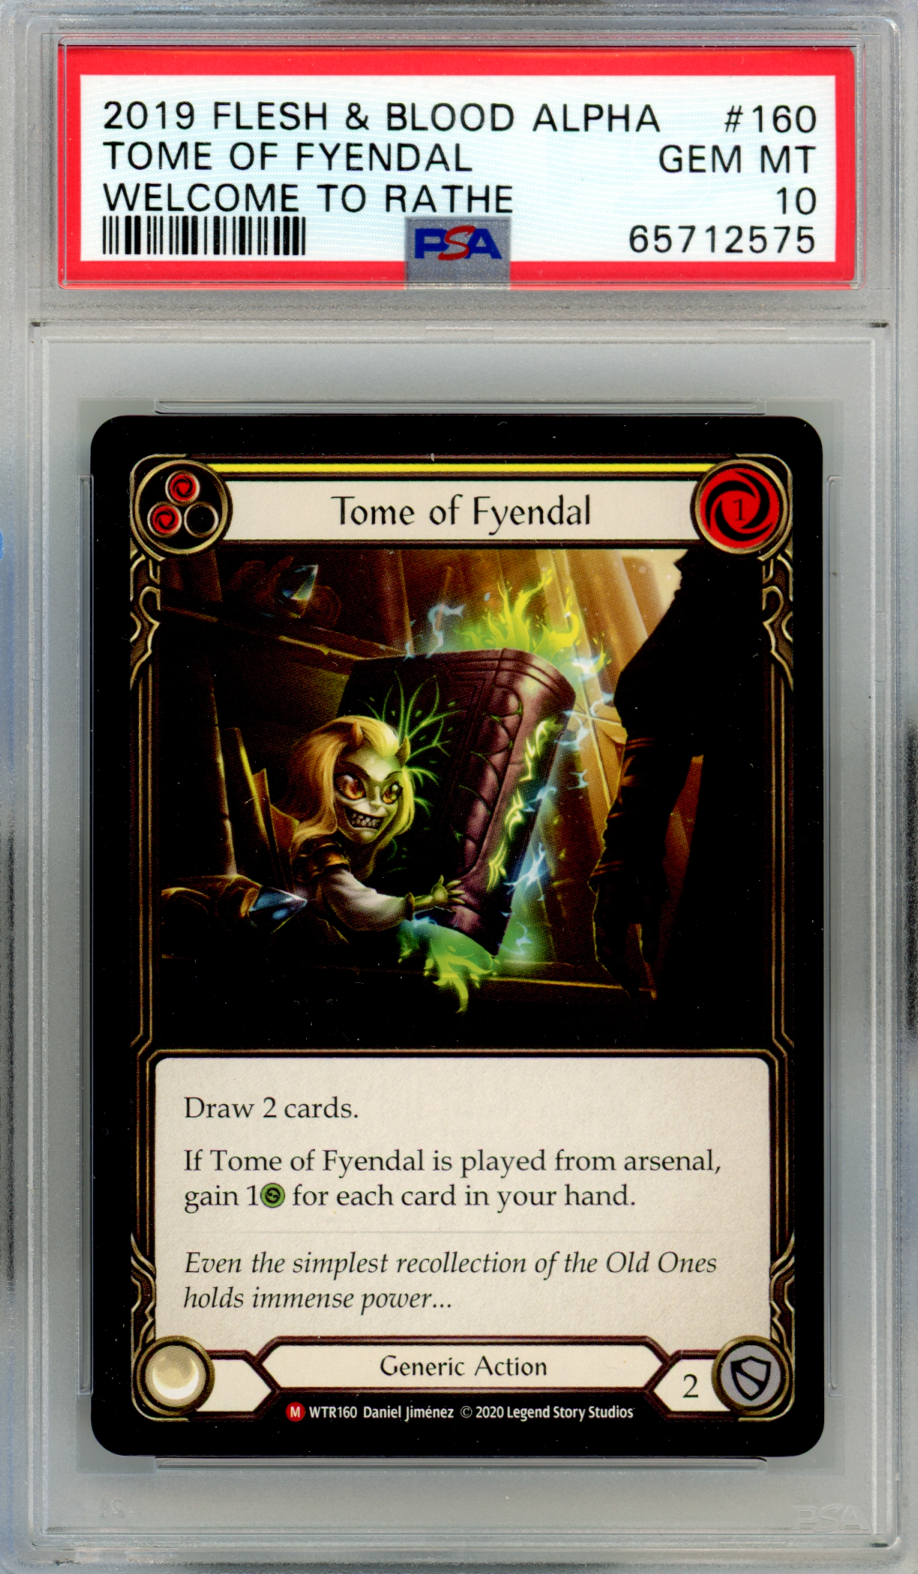 2019 FLESH AND BLOOD WELCOME TO RATHE ALPHA TOME OF FYENDAL PSA 10